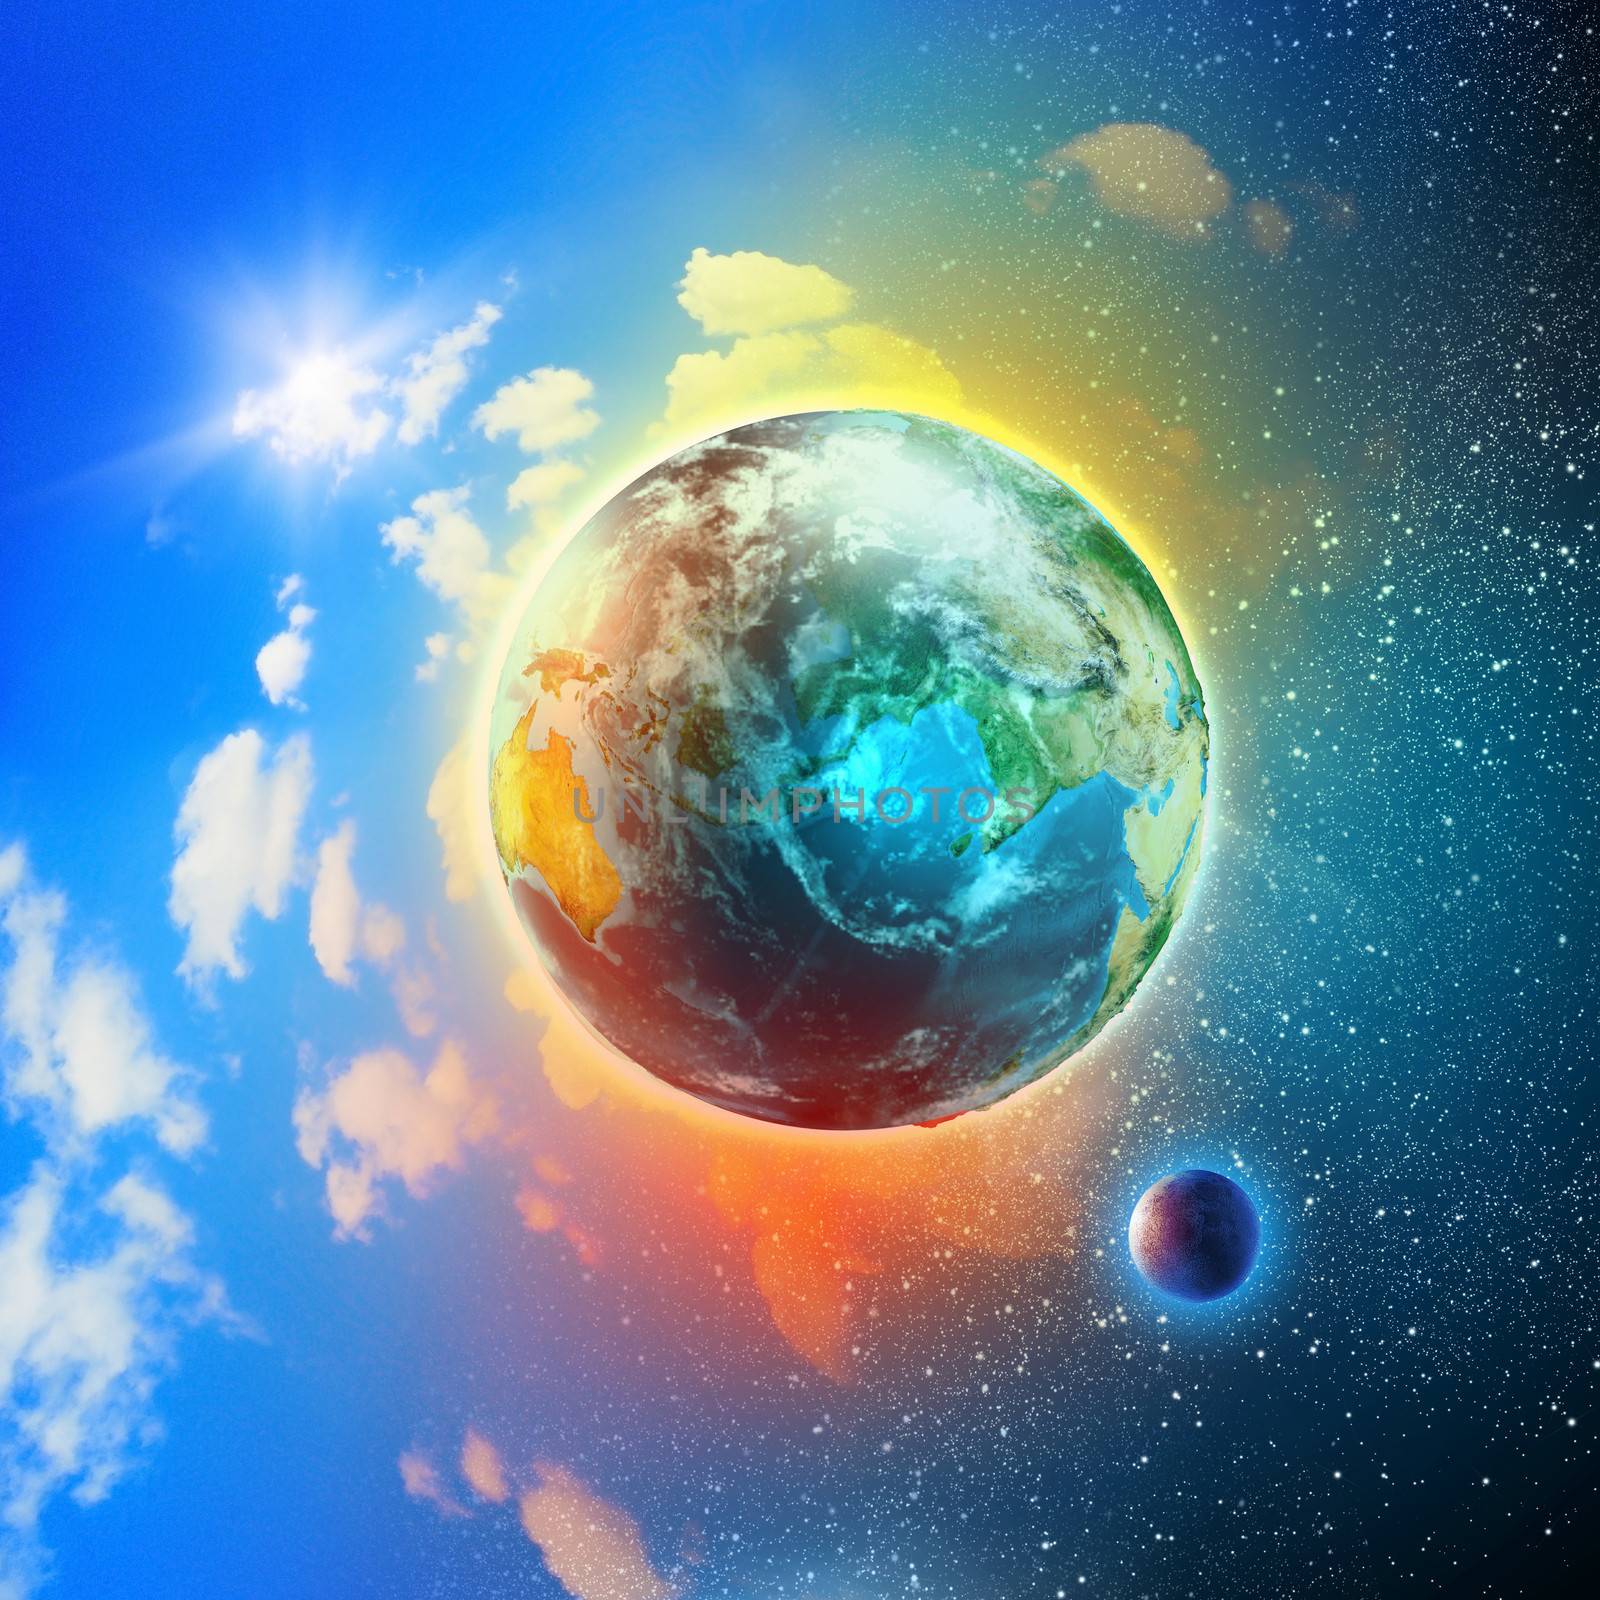 Image of earth planet. Elements of this image are furnished by NASA